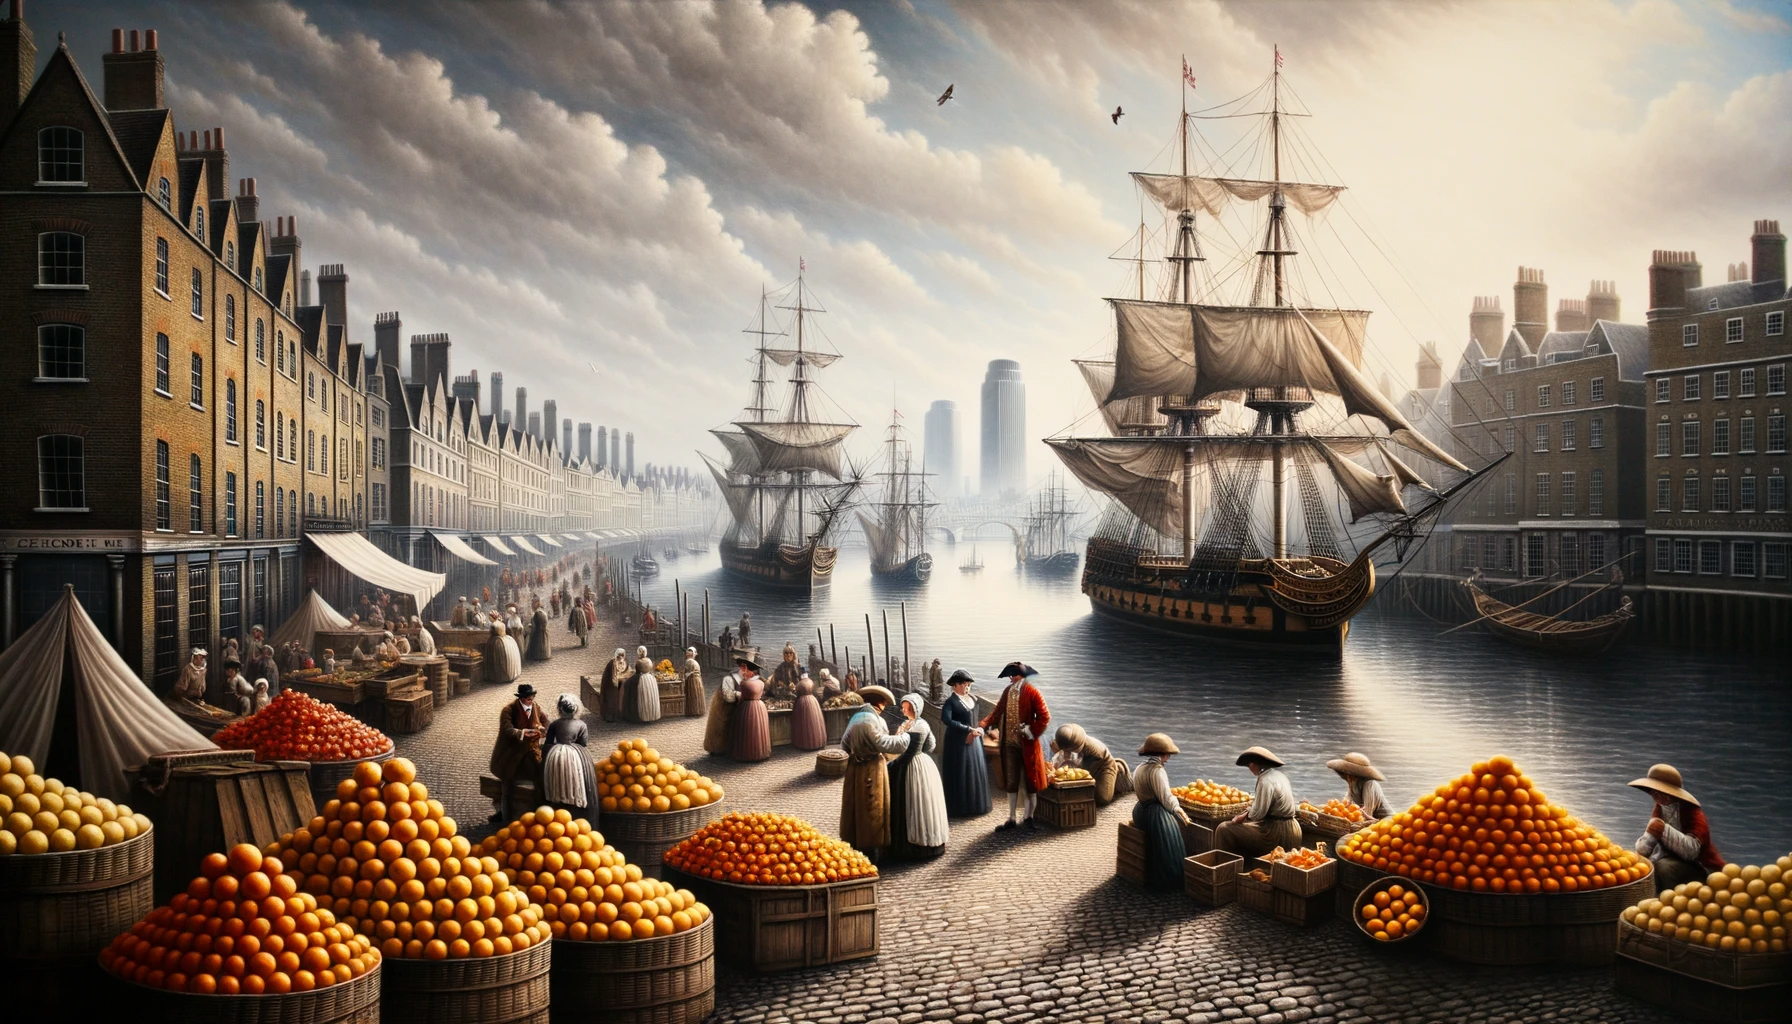 canal shipping scene in 18th Century London oraqnges and lemons